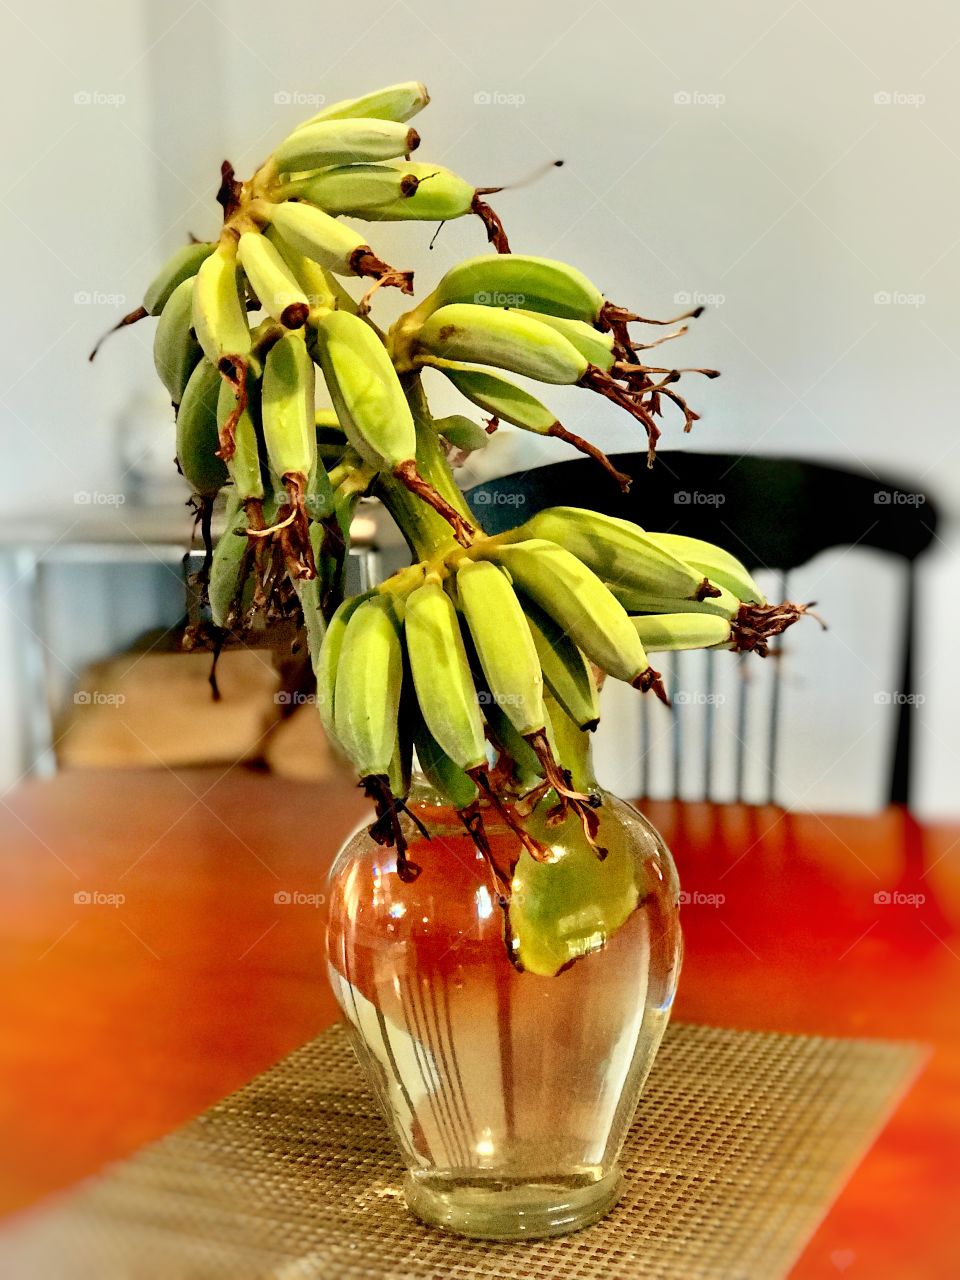 Flower vase with bananas